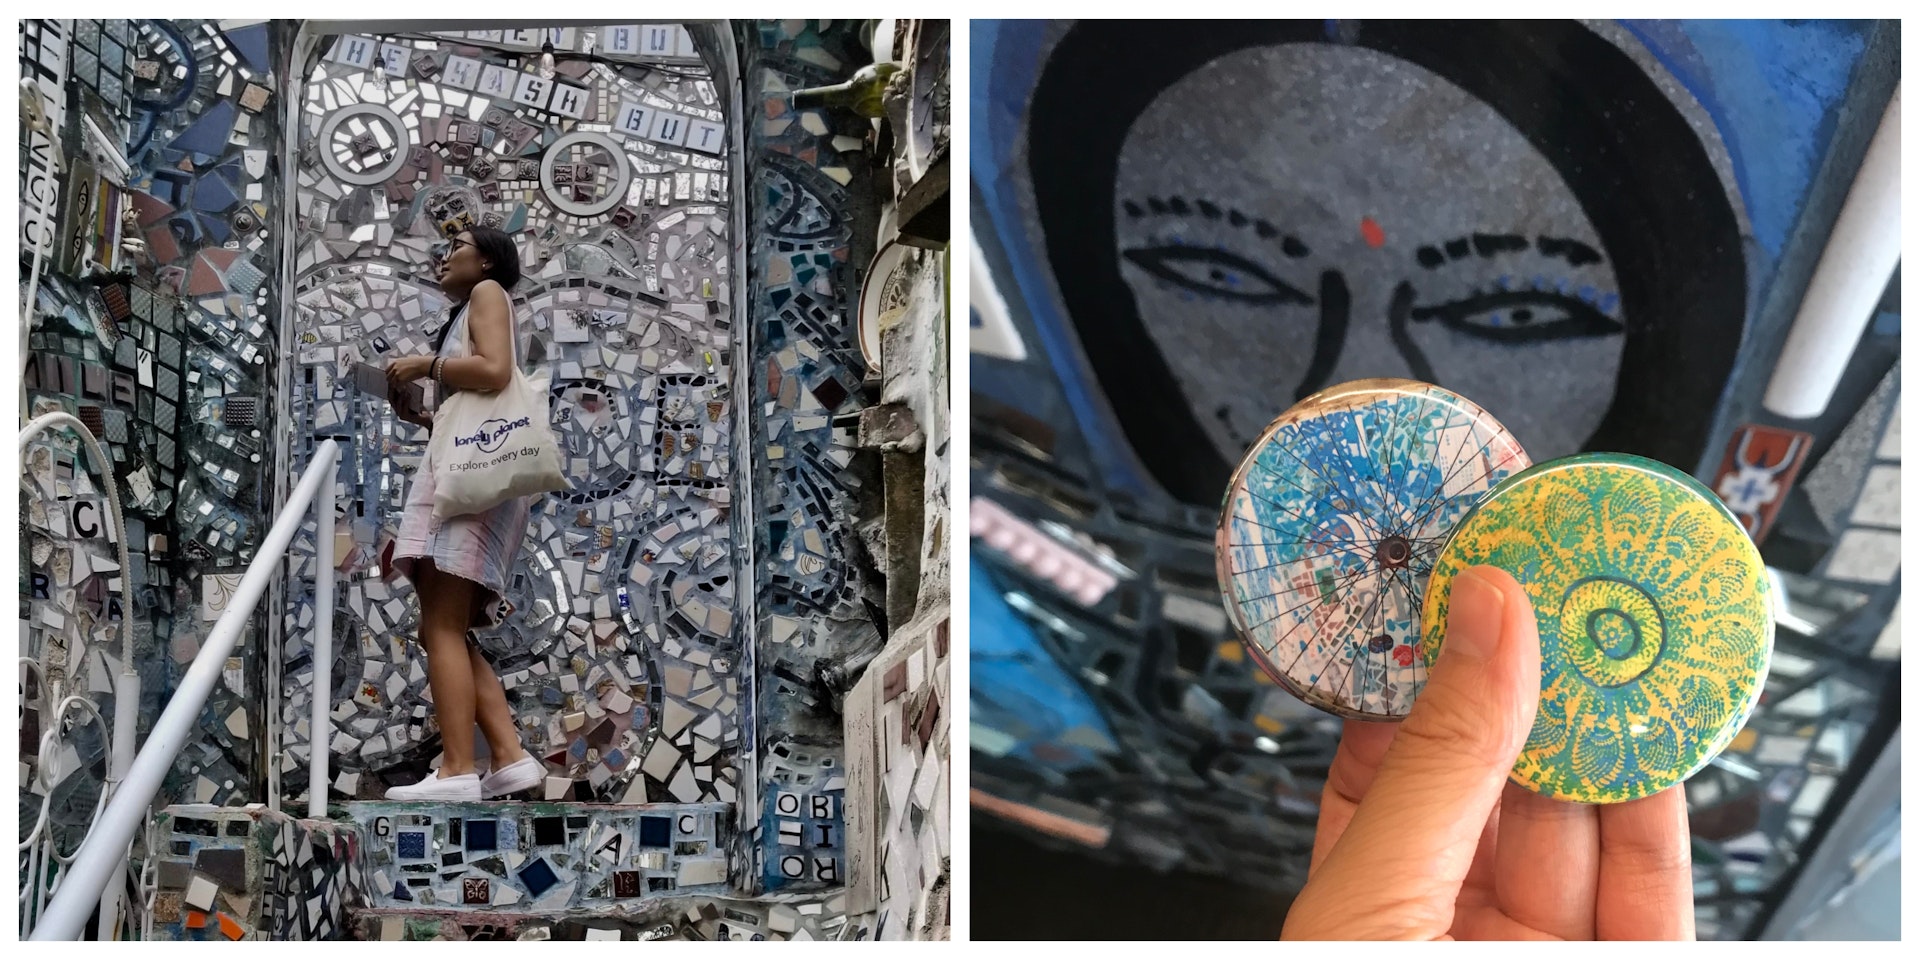 On the left, the author stands at the top of a staircase covered in mosaics, on the right is a close up of two buttons with colourful designs